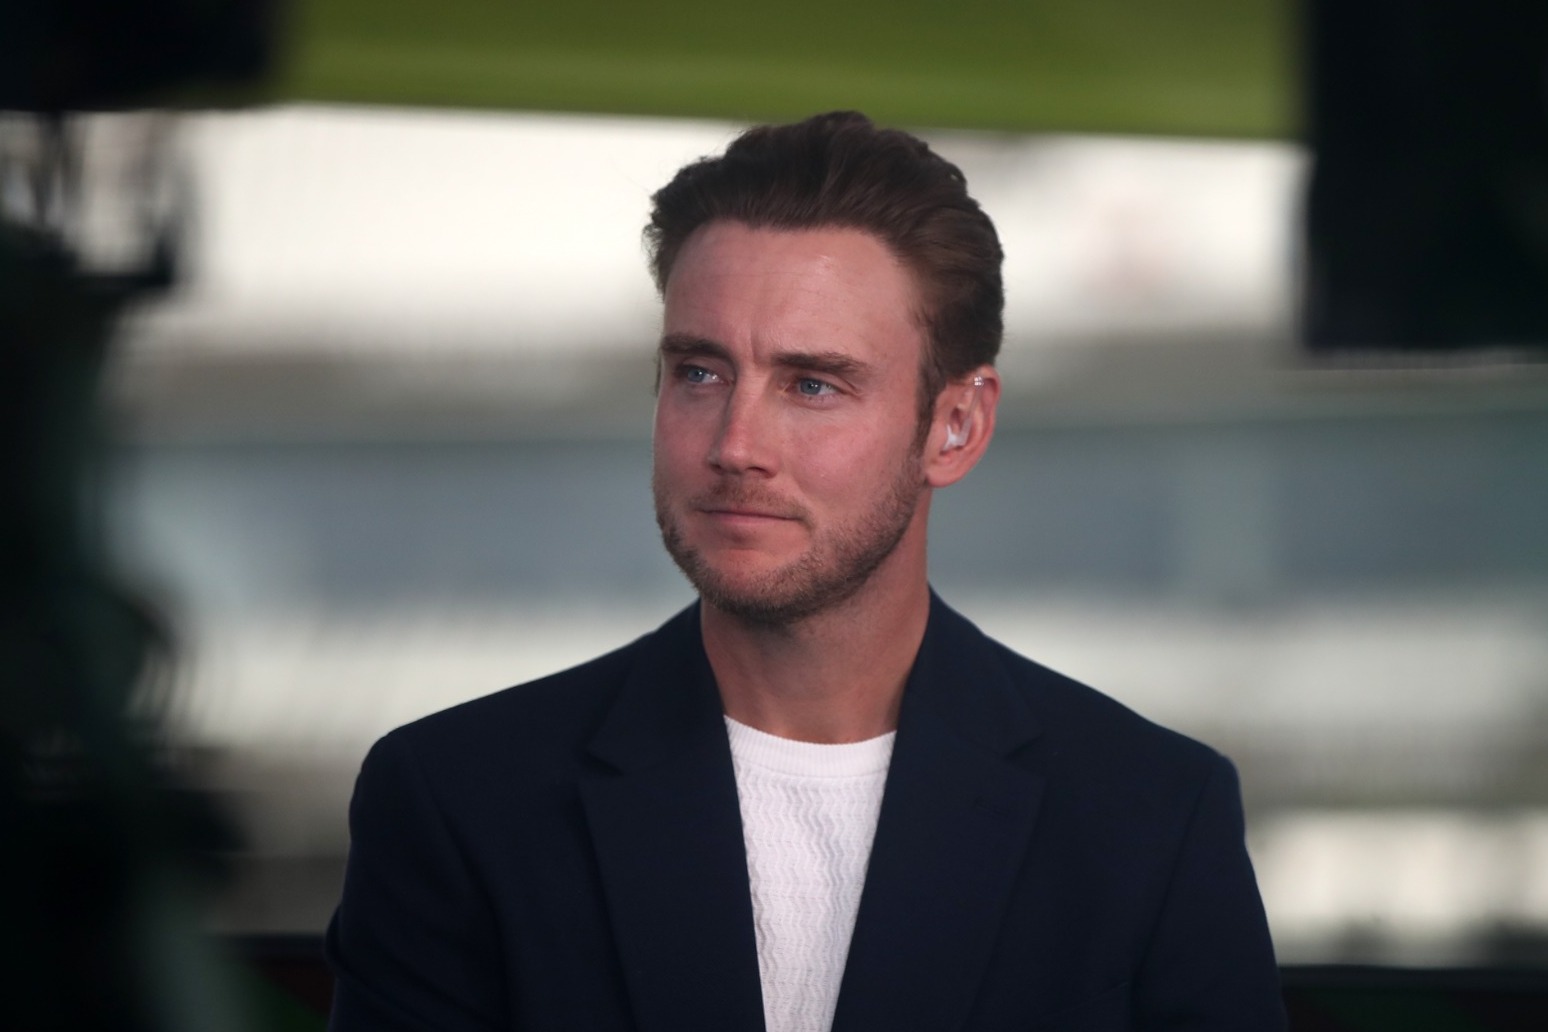 England cricketer Stuart Broad to join Strictly Come Dancing line-up – reports 